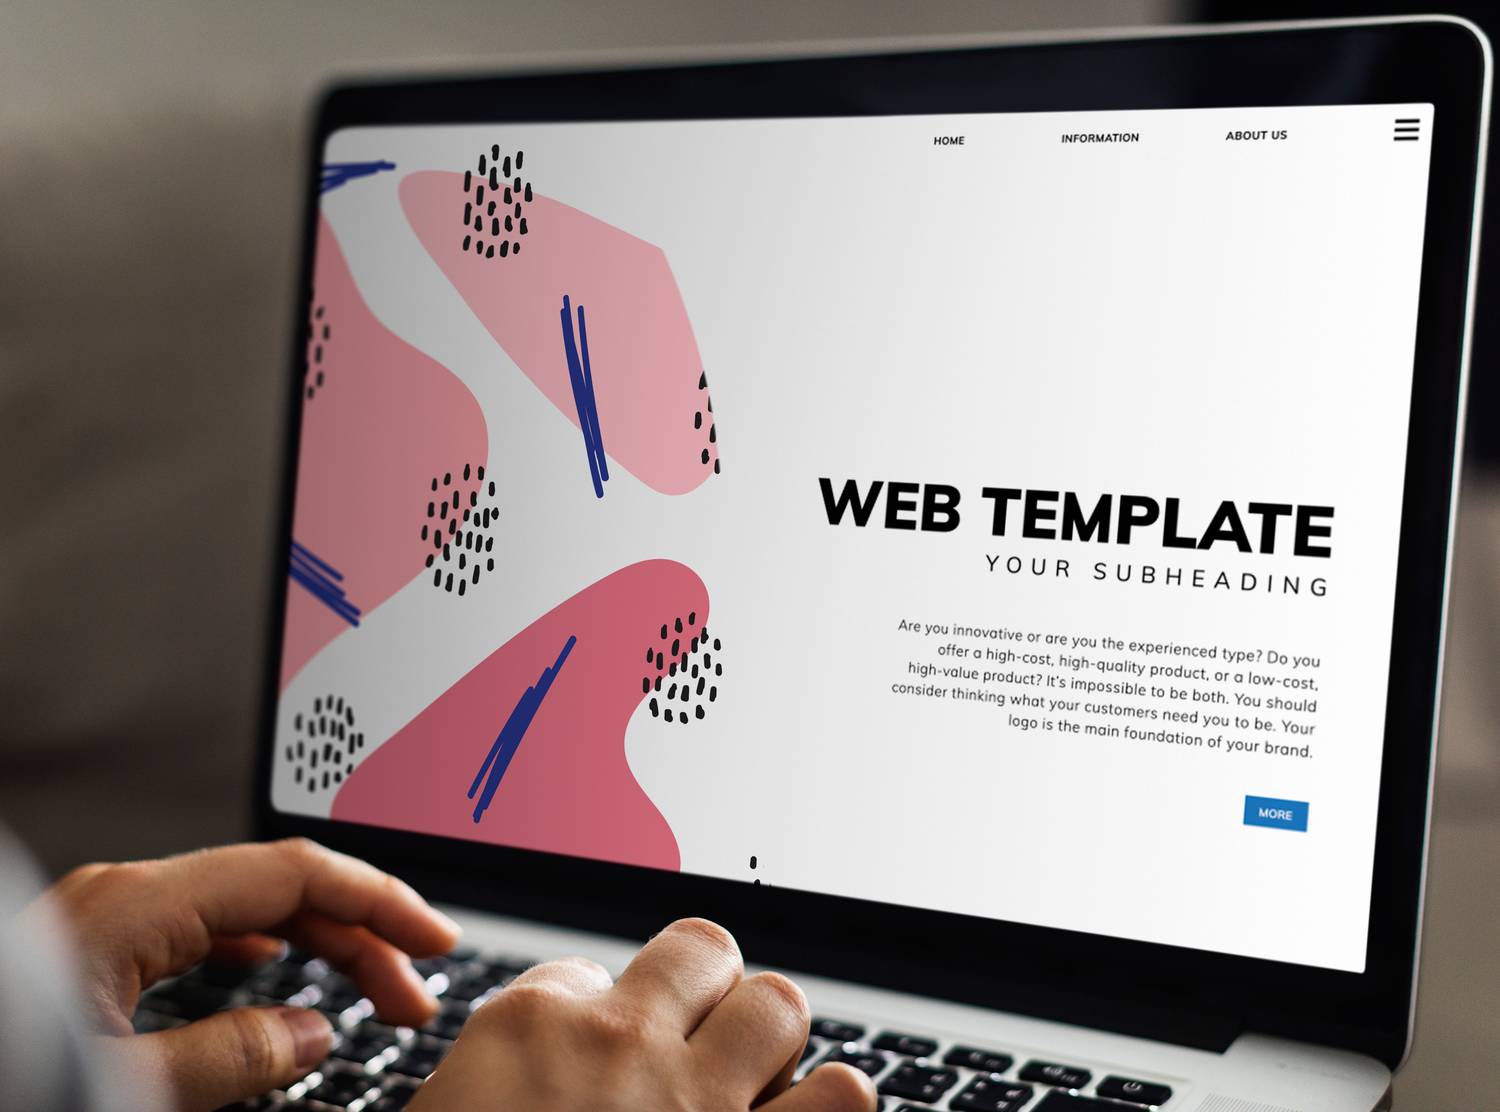 What Compels to Opt for Premium WordPress Themes Over Free Themes?